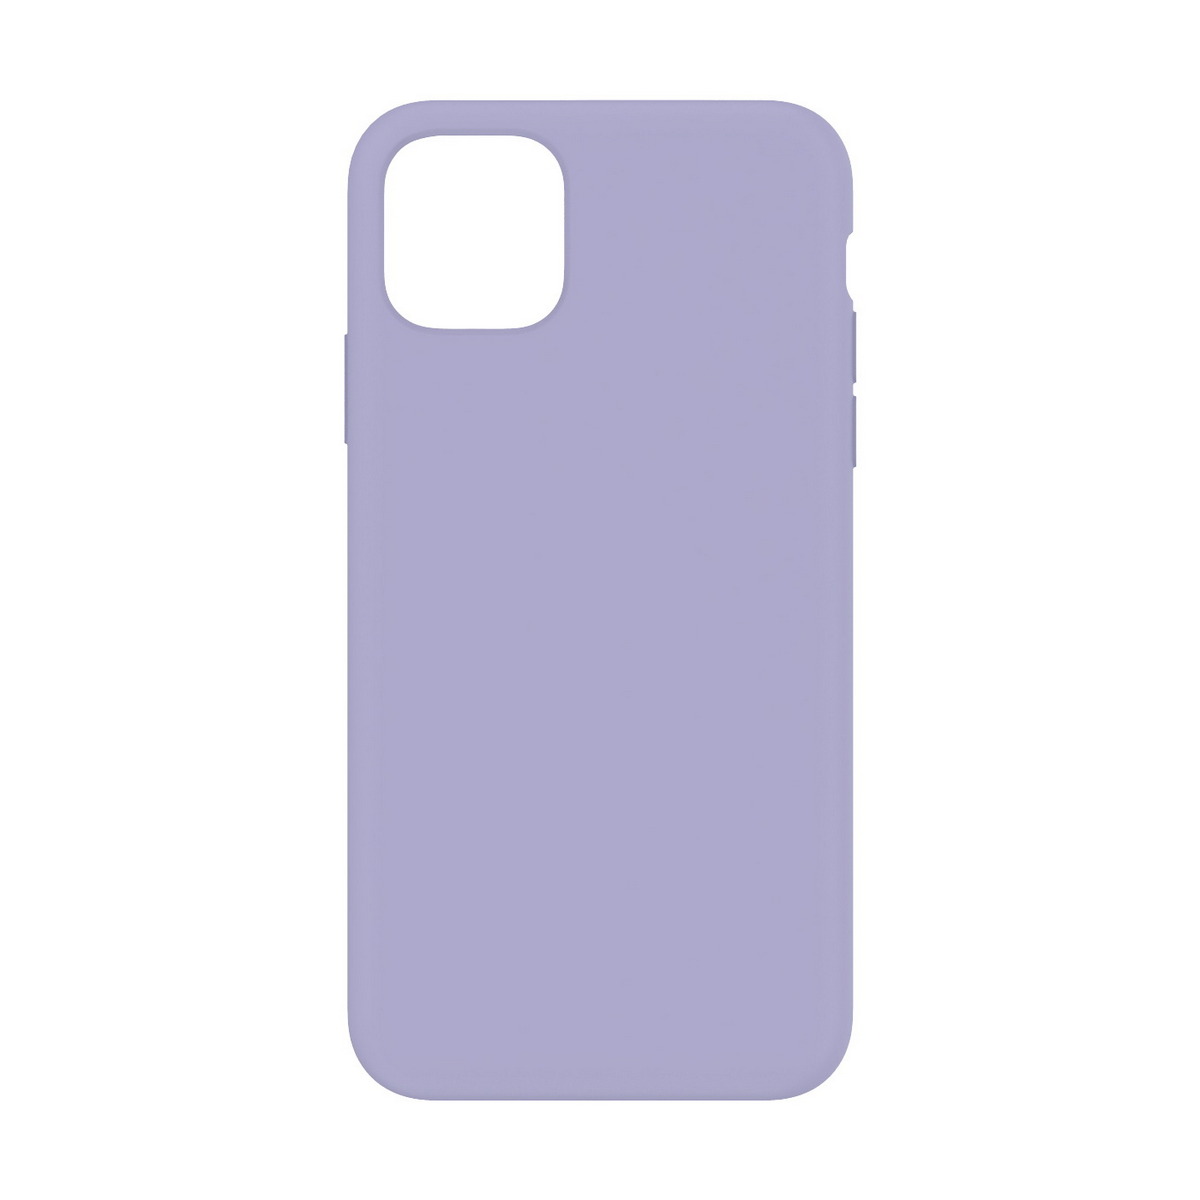 HEAL Case for iPhone 11 Pro (Purple) Case Silicone